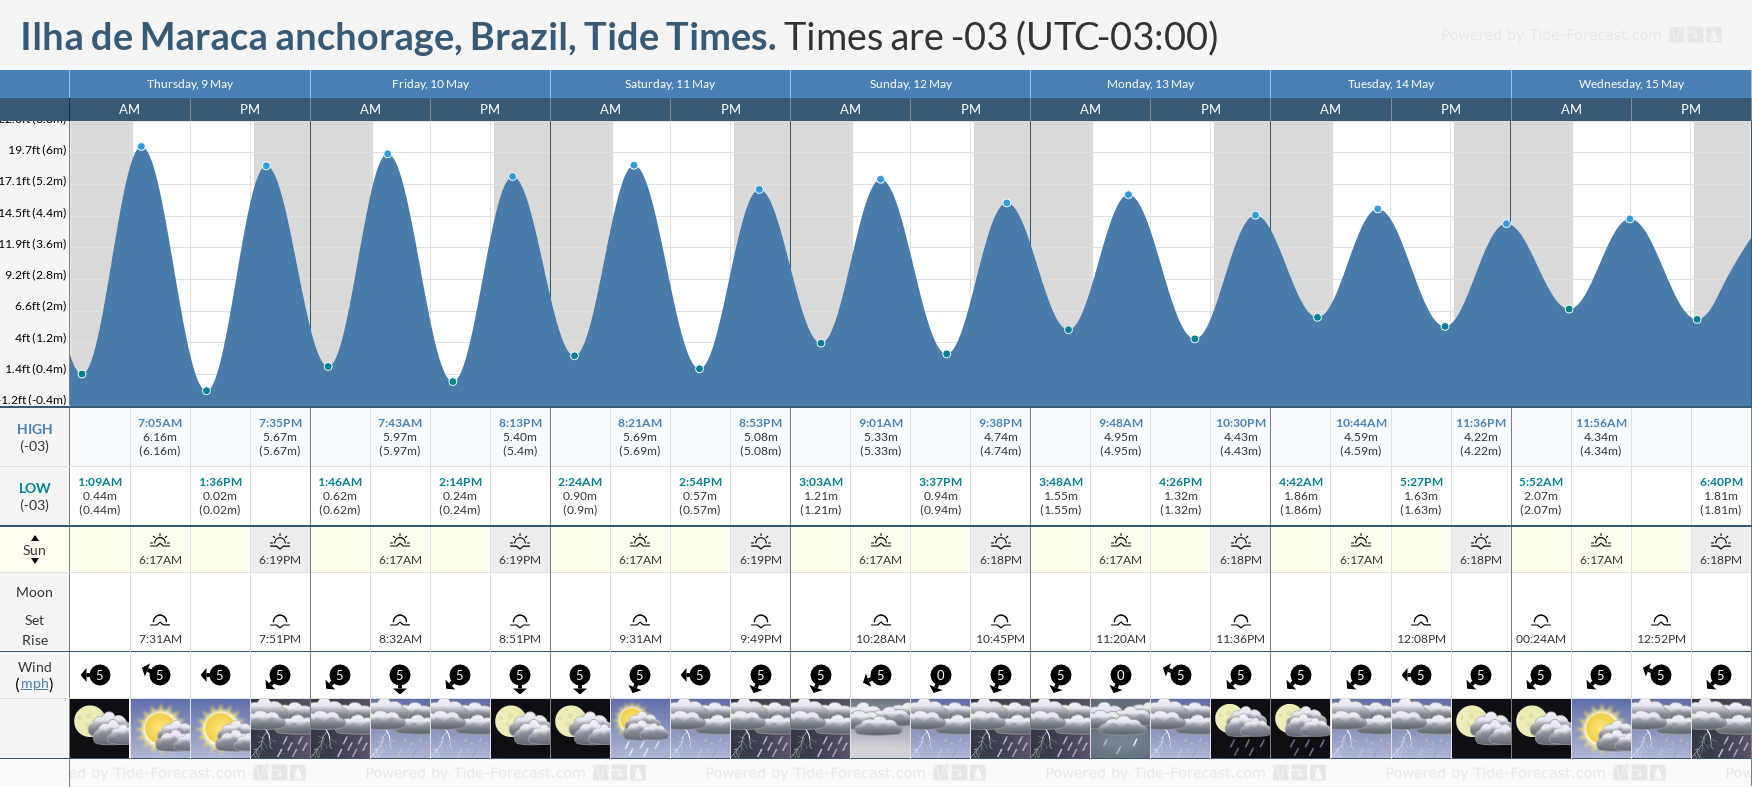 Ilha de Maraca anchorage, Brazil Tide Chart including high and low tide tide times for the next 7 days